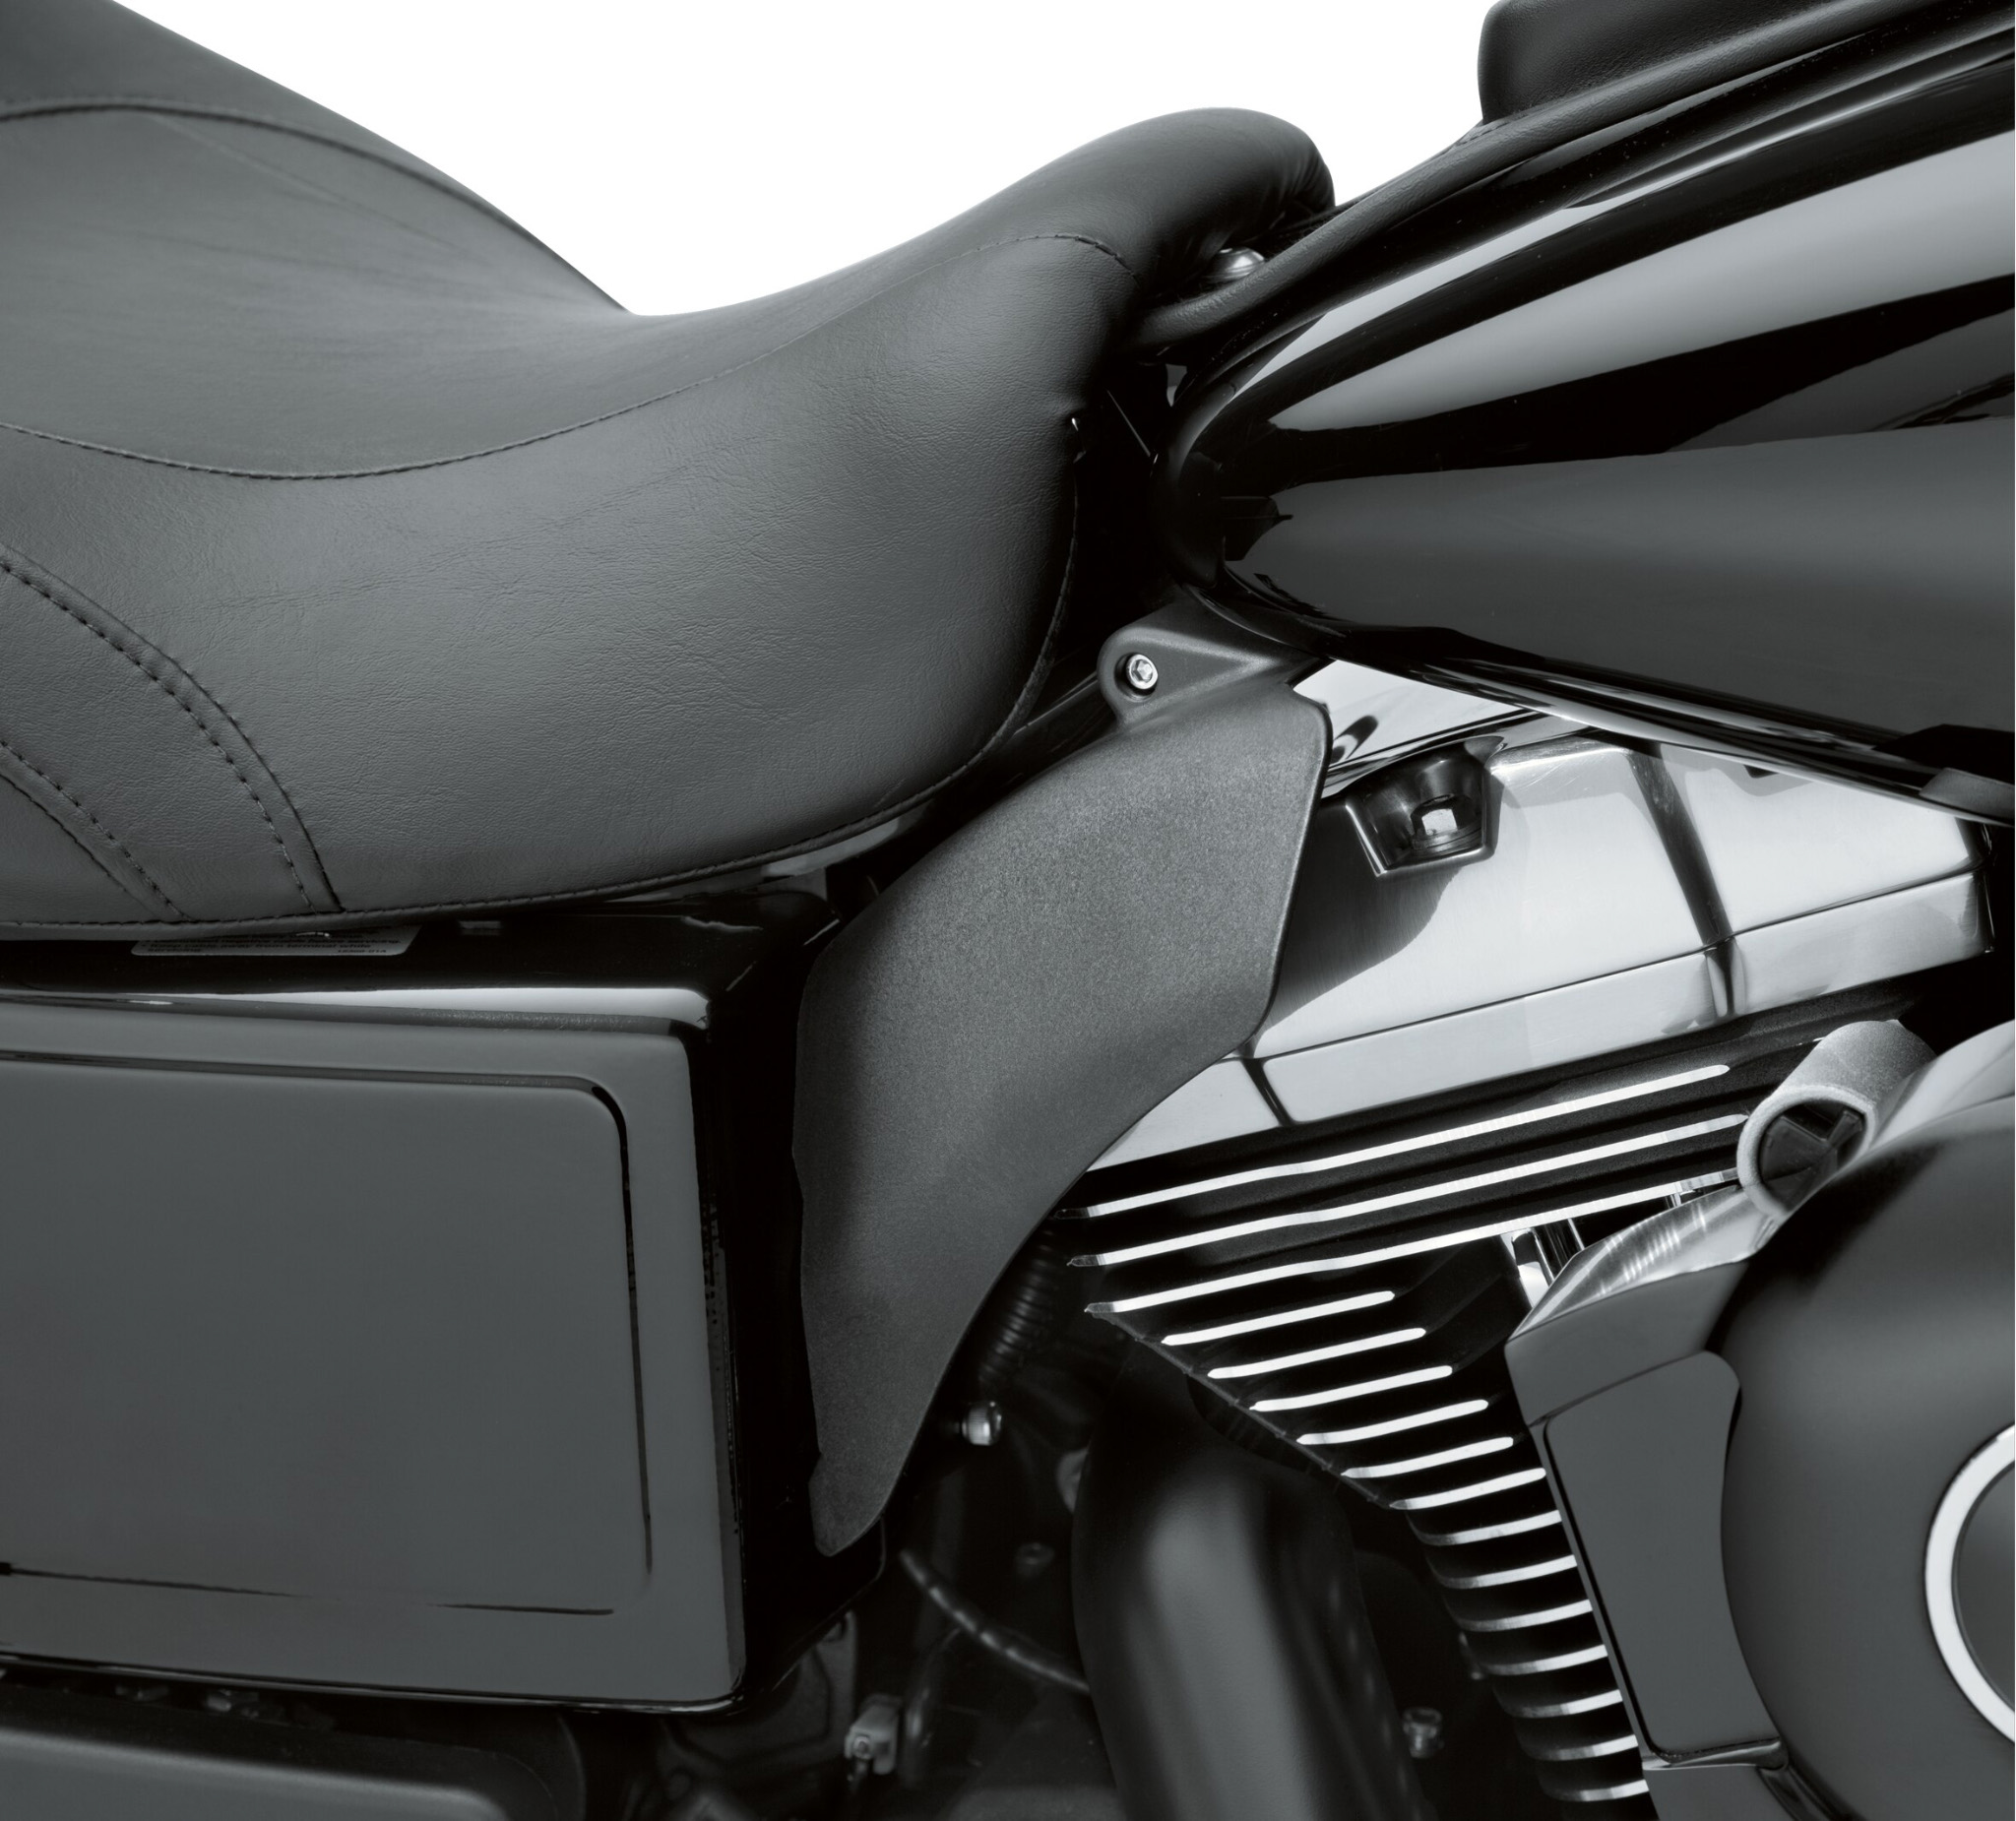 Flame Mid-Frame Engine Air Deflectors Heat Shield Trim For Harley Touring 09-up